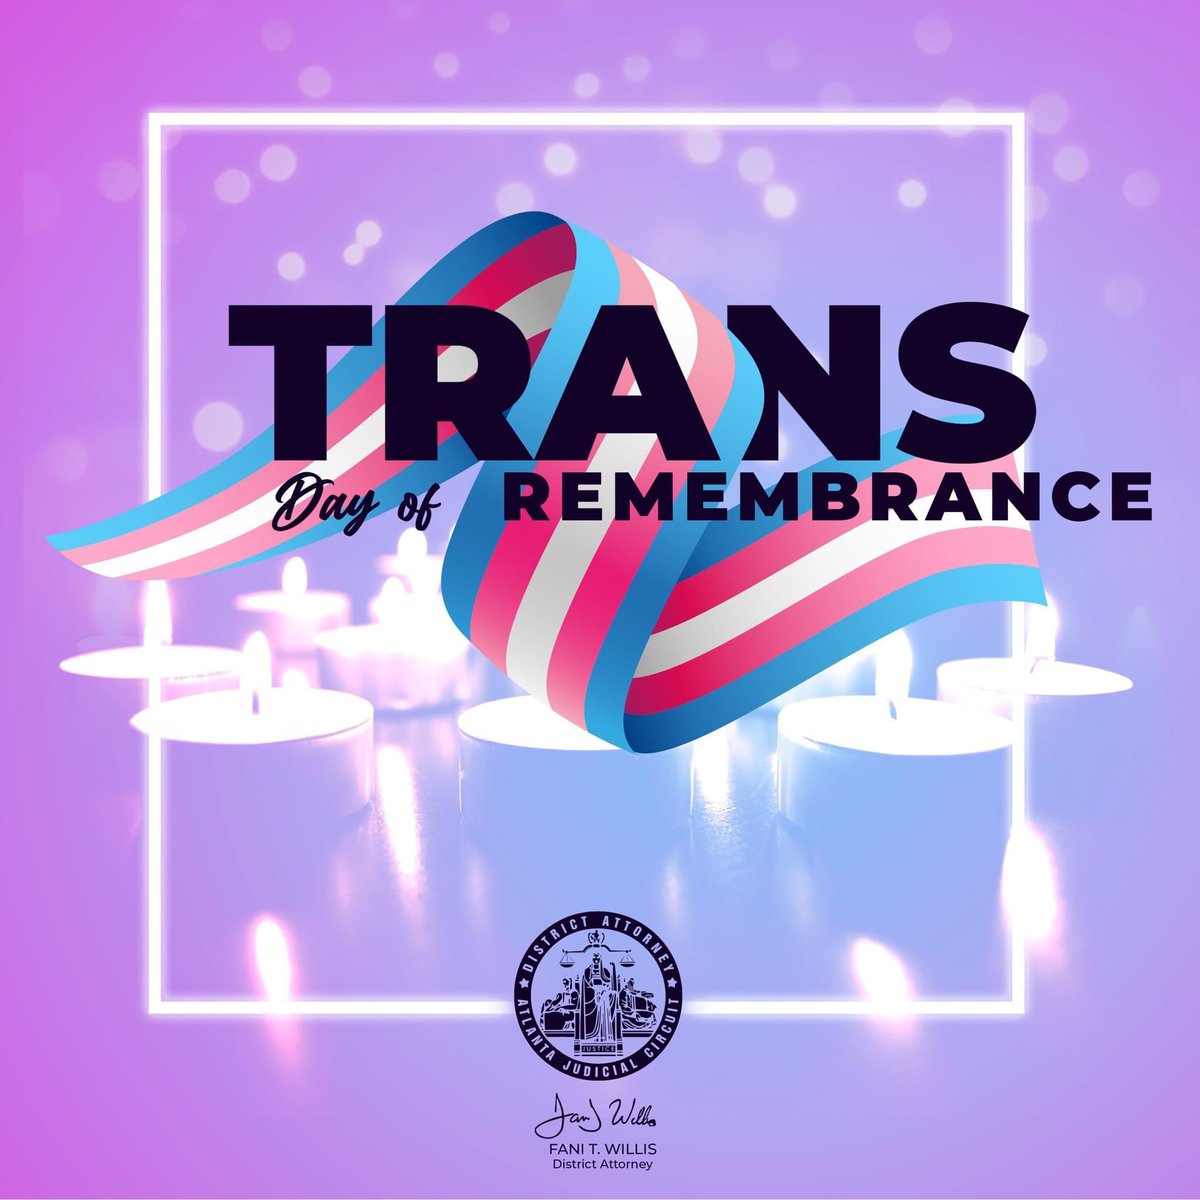 DA Willis and the @FultonCountyDA’s Office stand in solidarity with the trans community. We honor lives lost to anti-trans violence and remain committed to protecting and advocating for trans rights. We stand together against hate, violence, and bigotry. #TransDayOfRemembrance